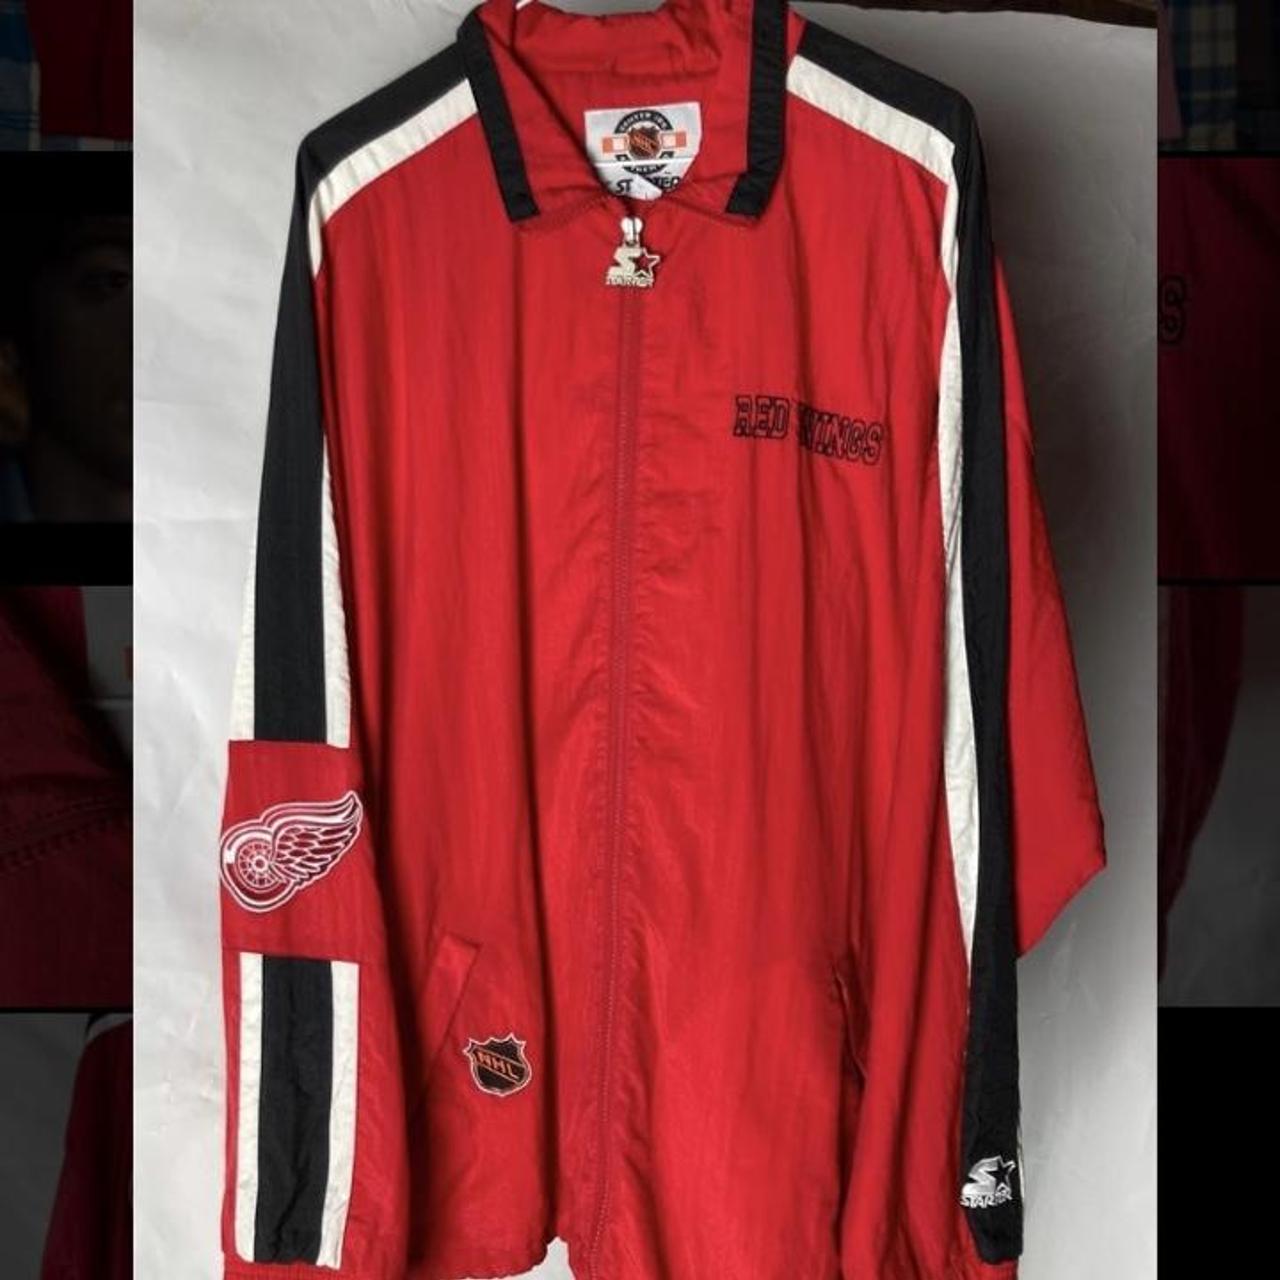 Vintage Red Wings Starter Jacket Chest and Sleeve - Depop